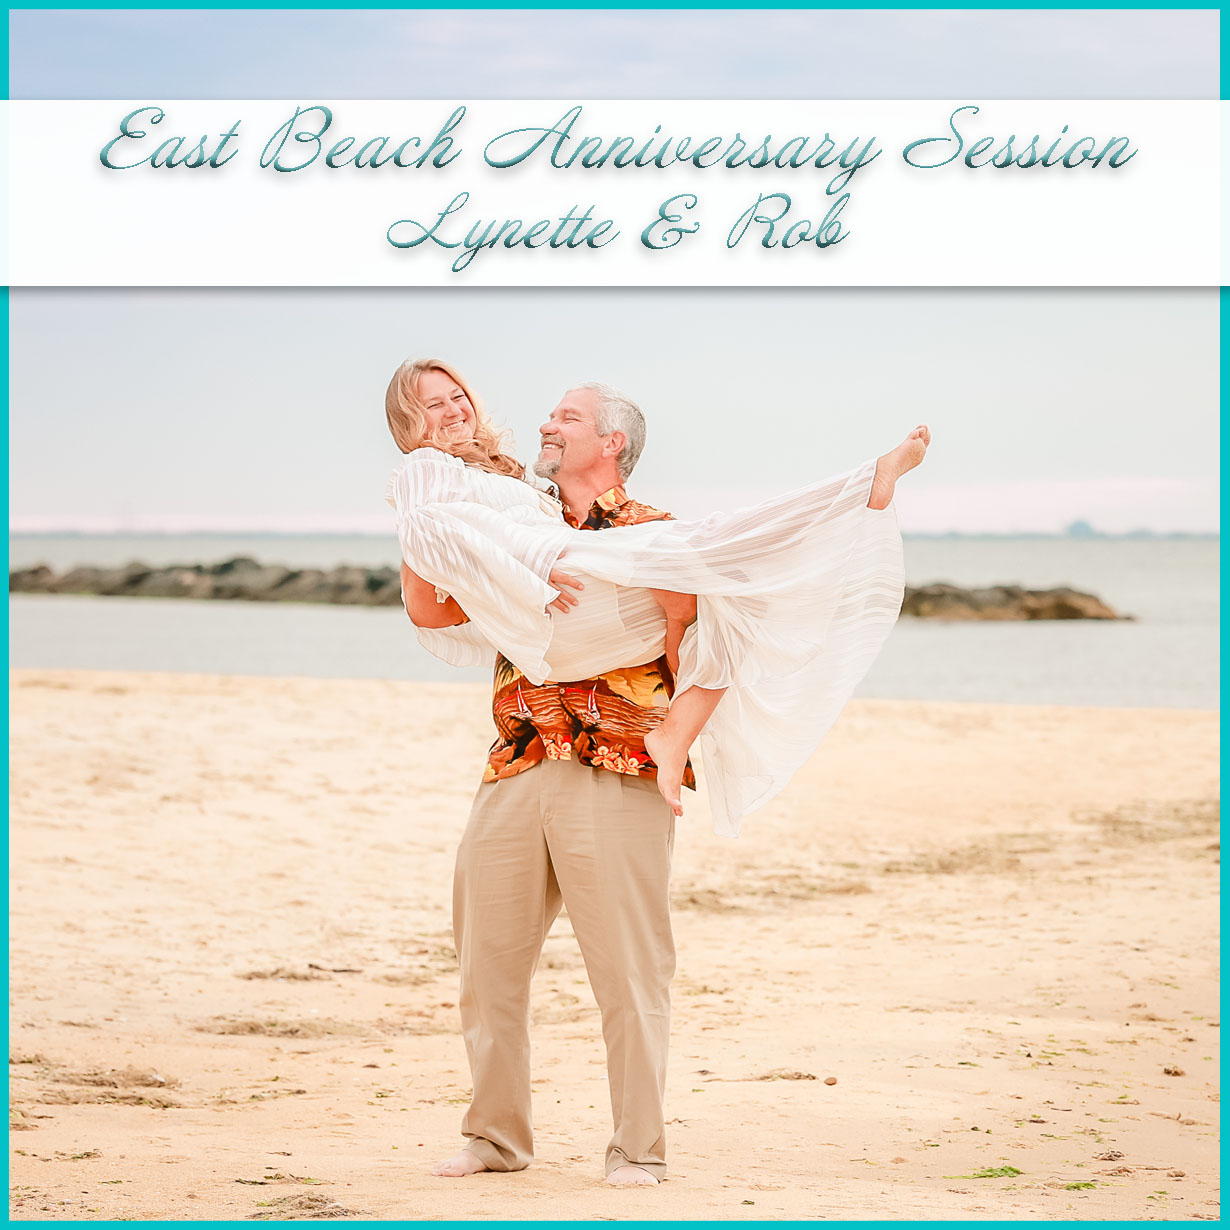 East Beach Anniversary Session